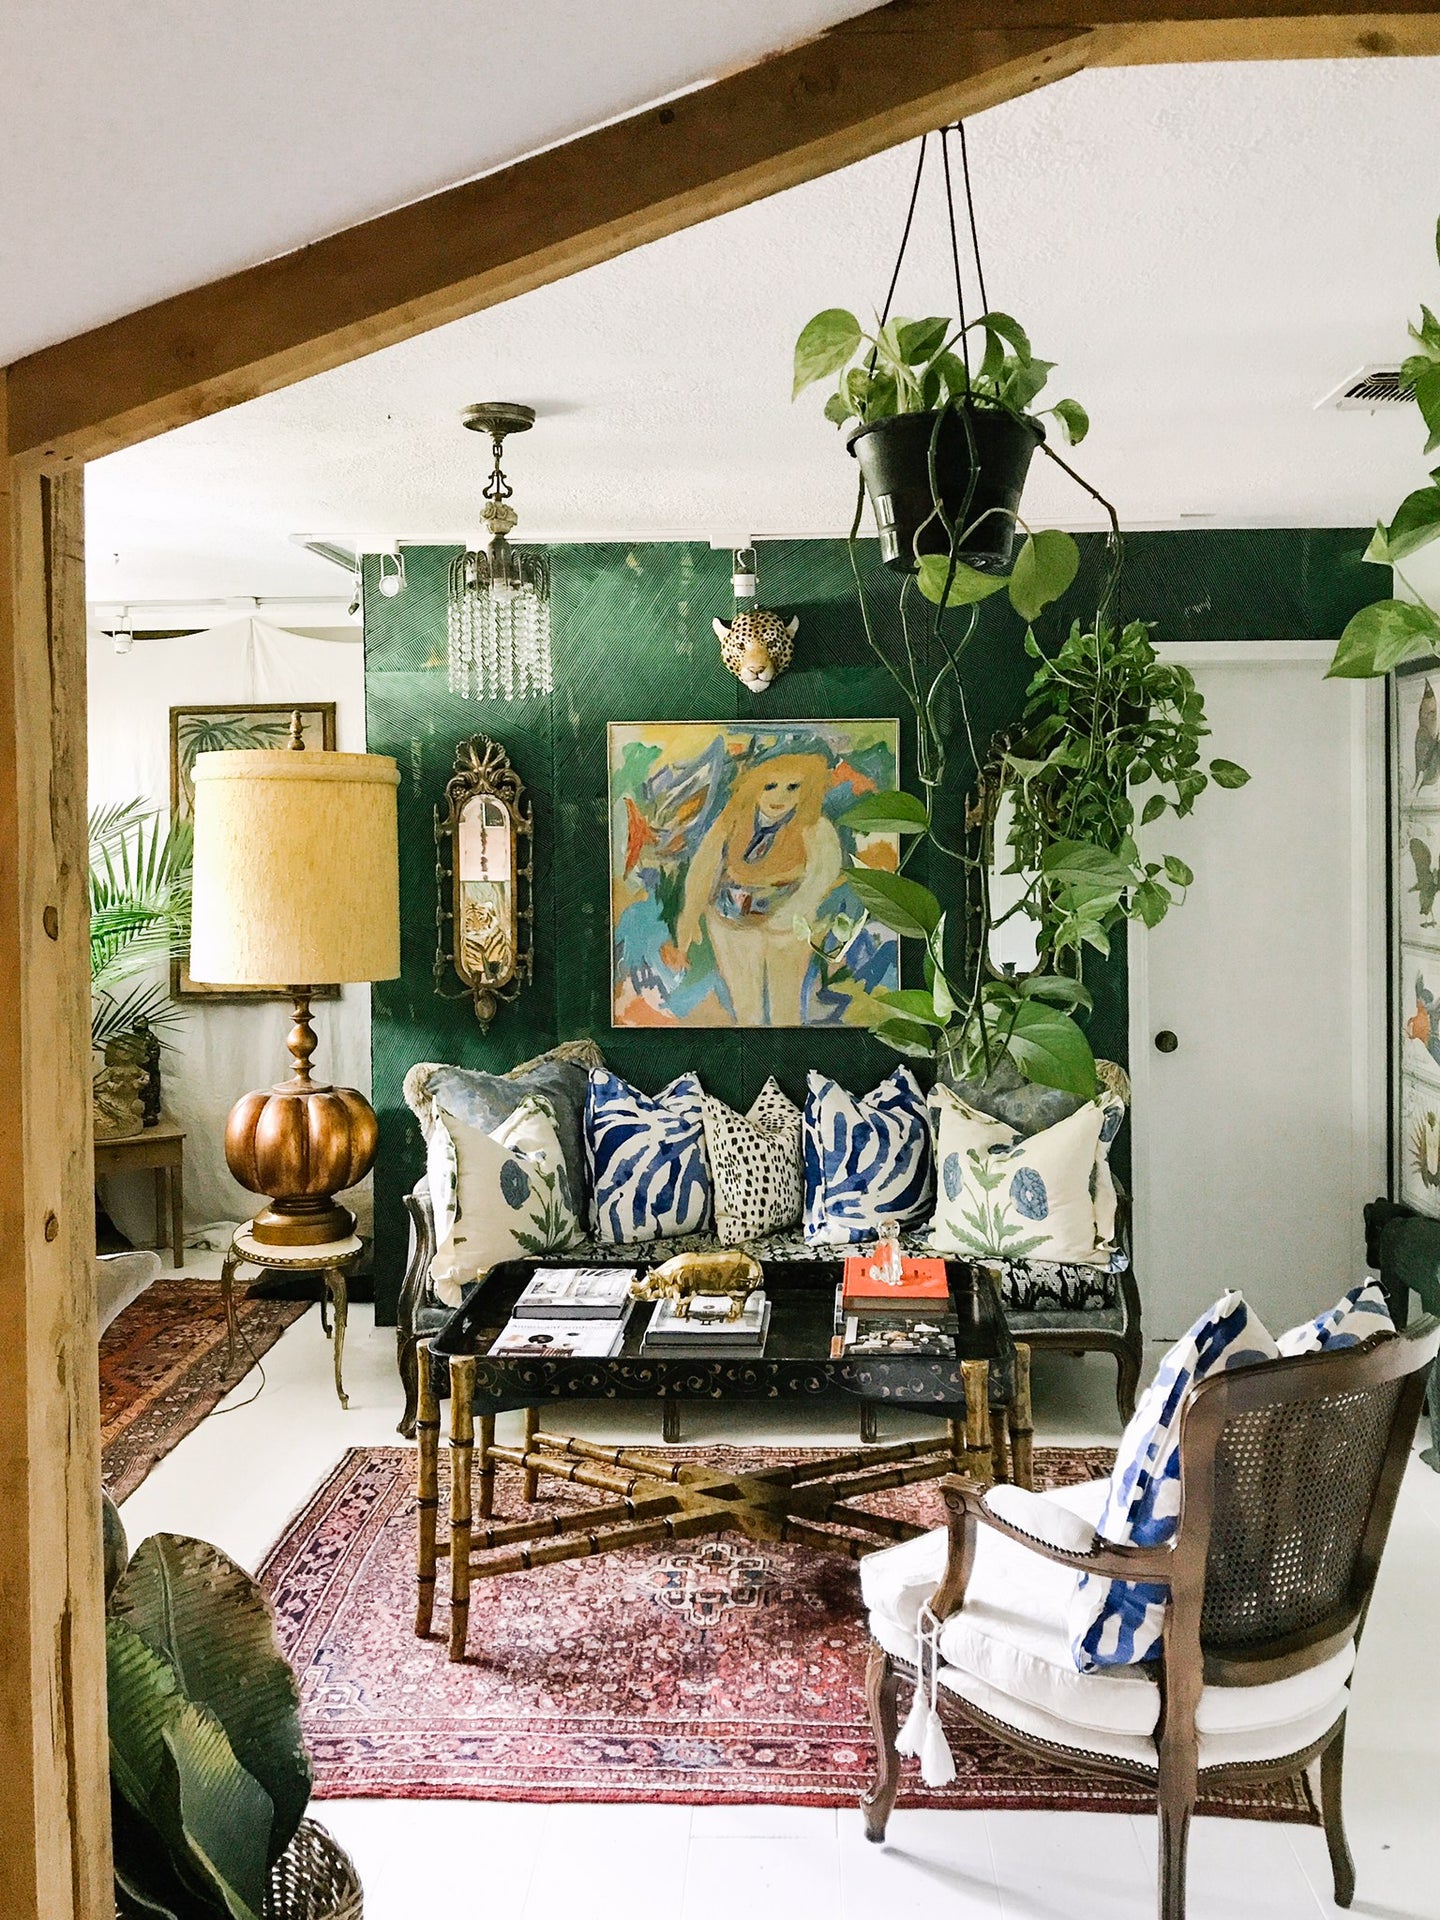 Inside a Maximalist Home Filled With The Most Unique Textiles